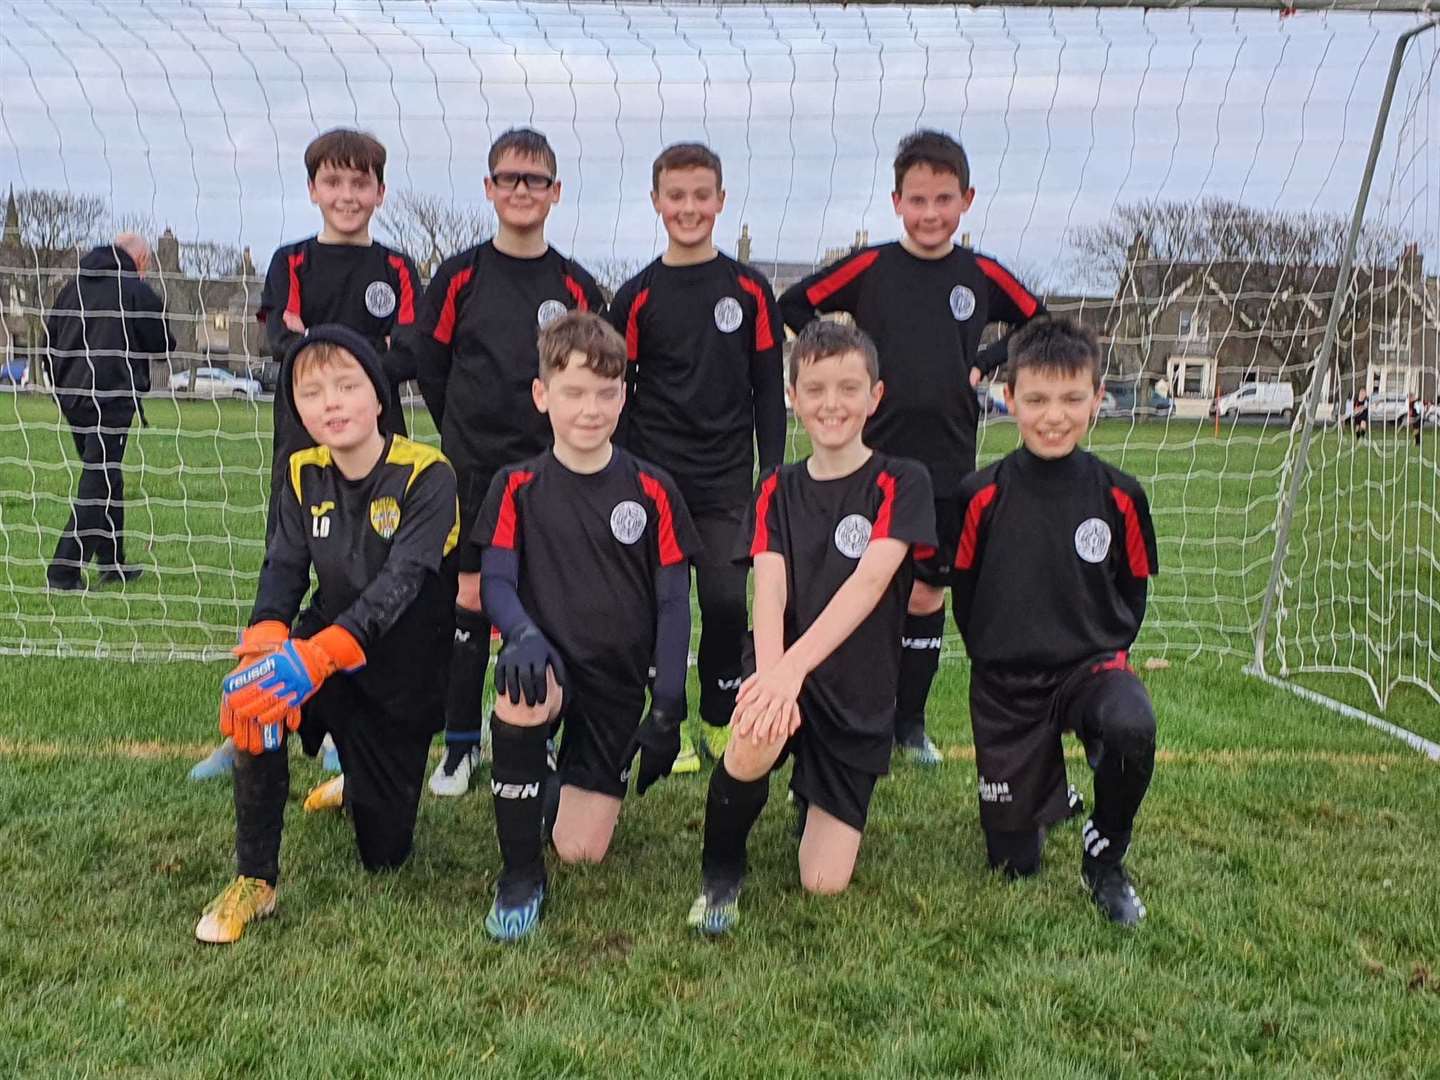 Caithness United Team 2 who competed well in the under-12 football festival in Wick.